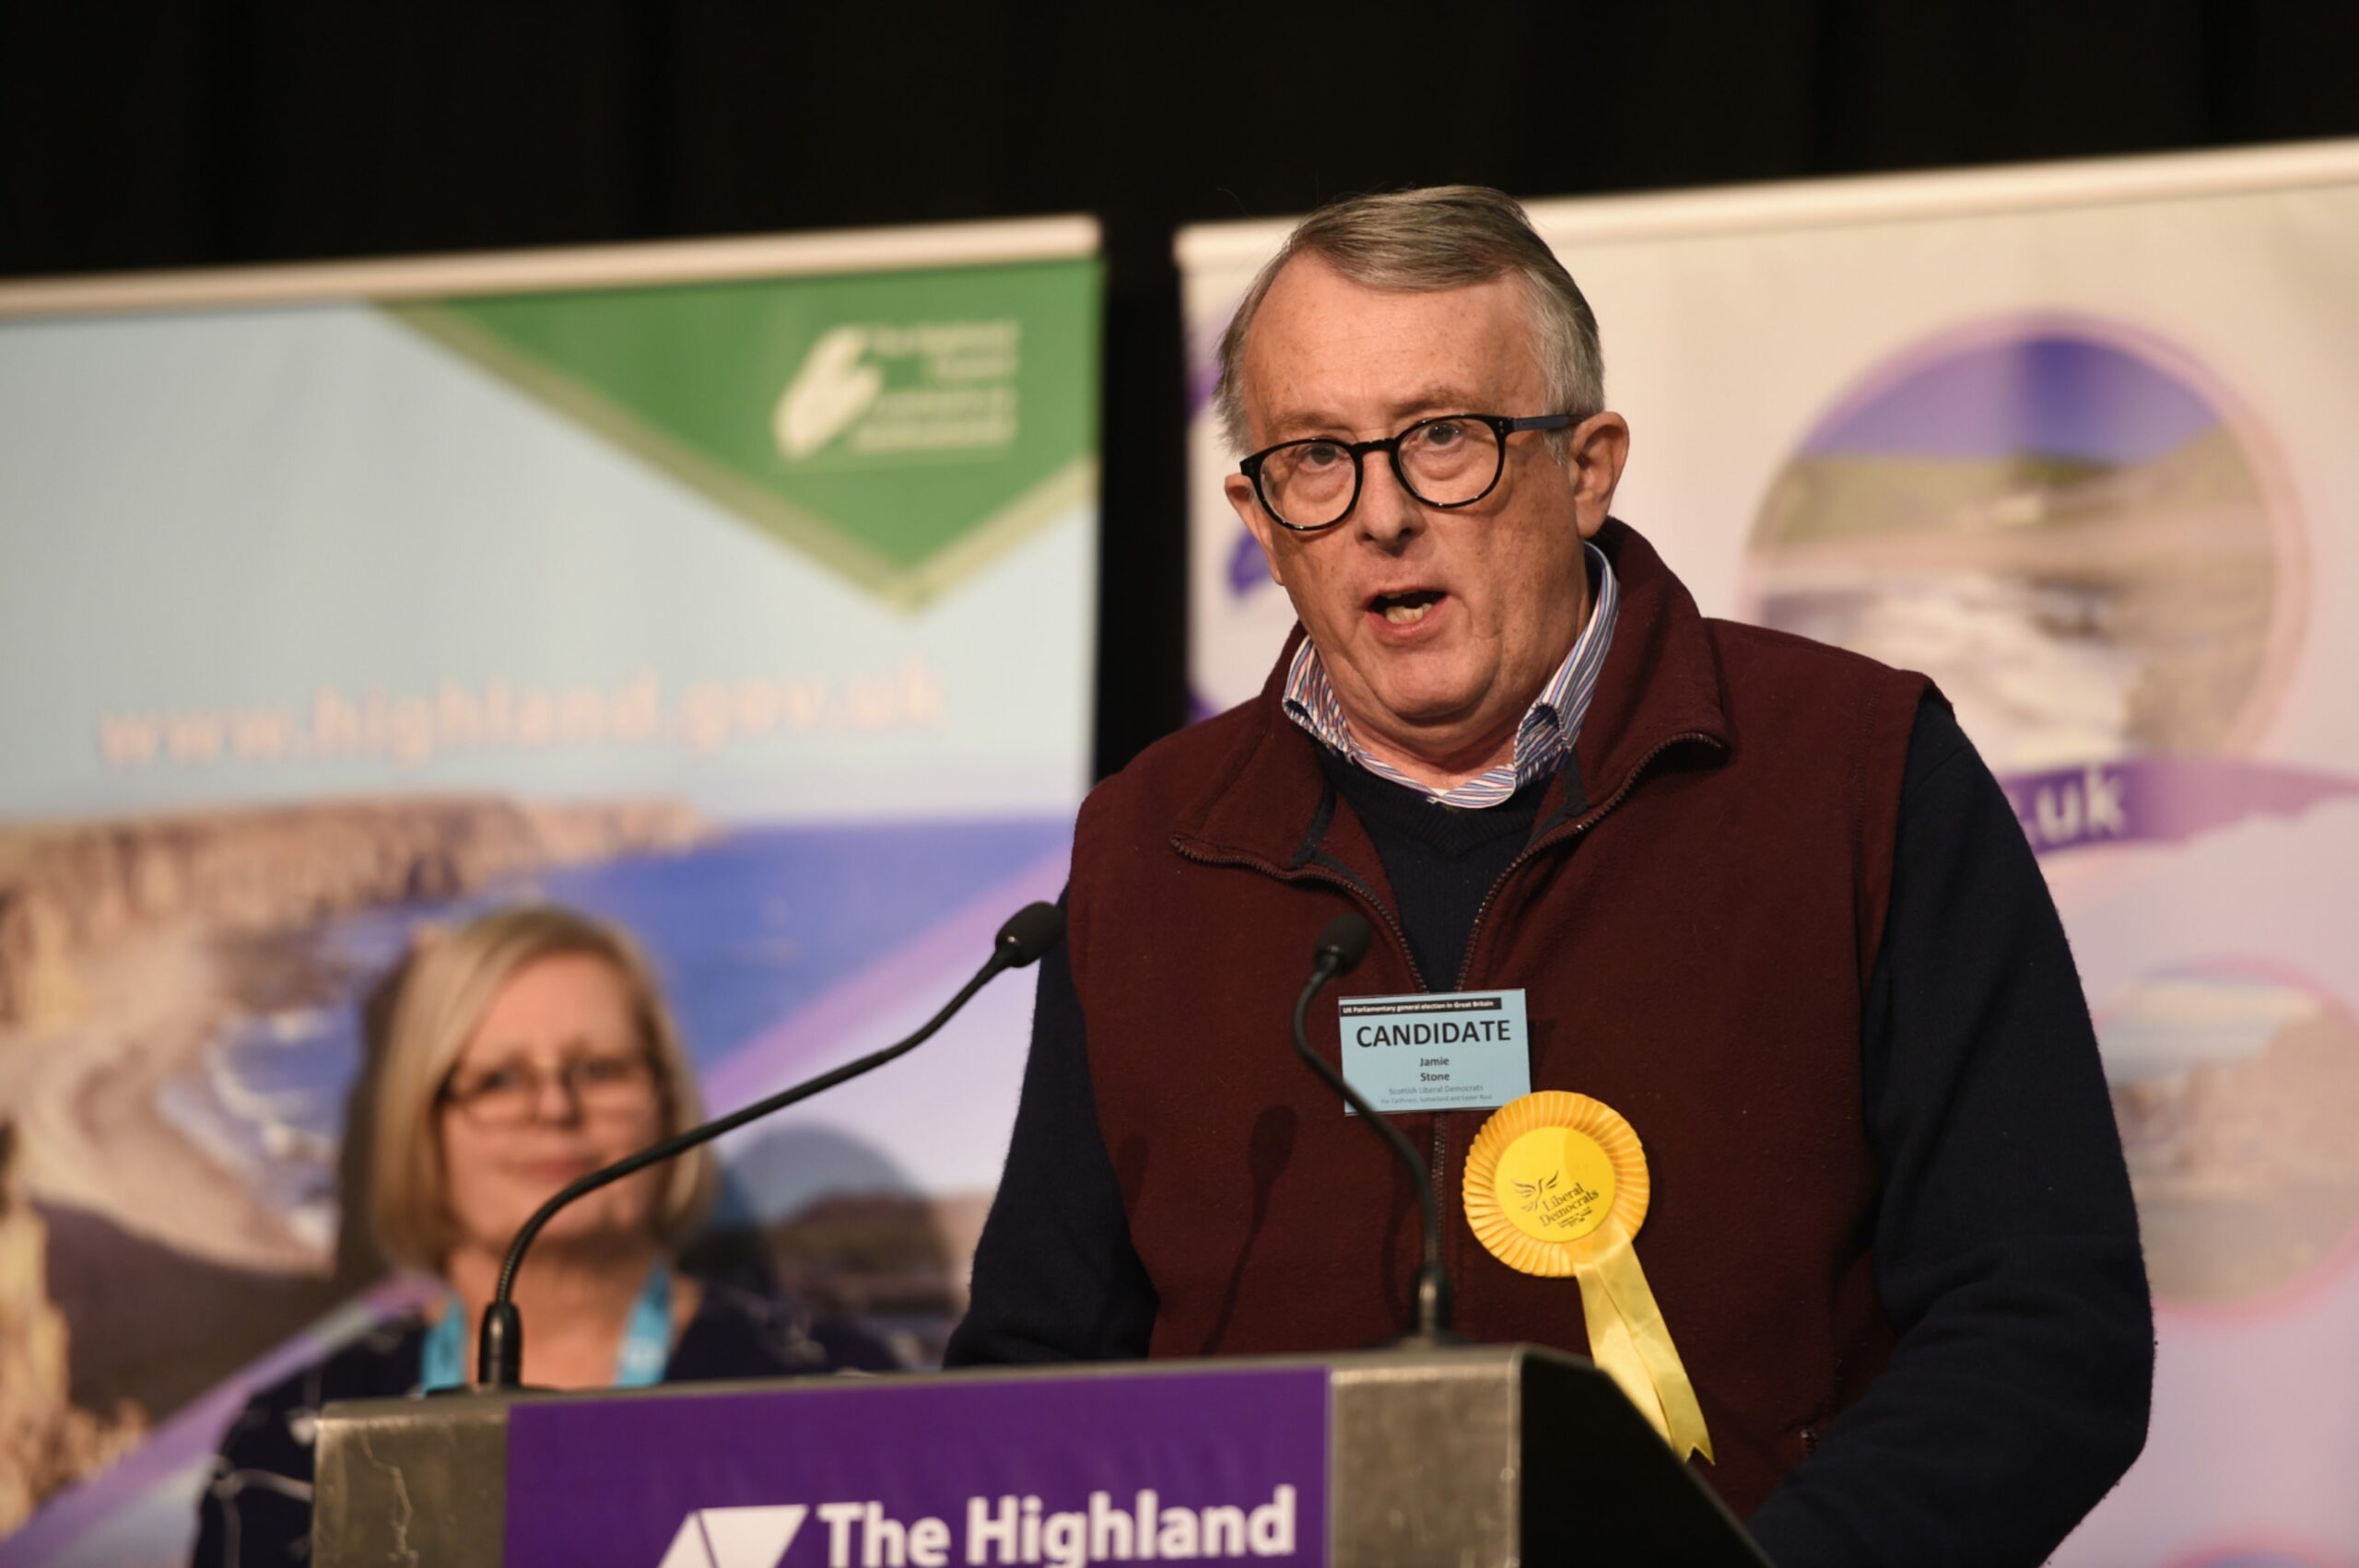 Jamie Stone, the MP for Caithness, Sutherland and Easter Ross, wants clarity over the vaccination changes in NHS Highland. Image: Sandy McCook/ DC Thomson